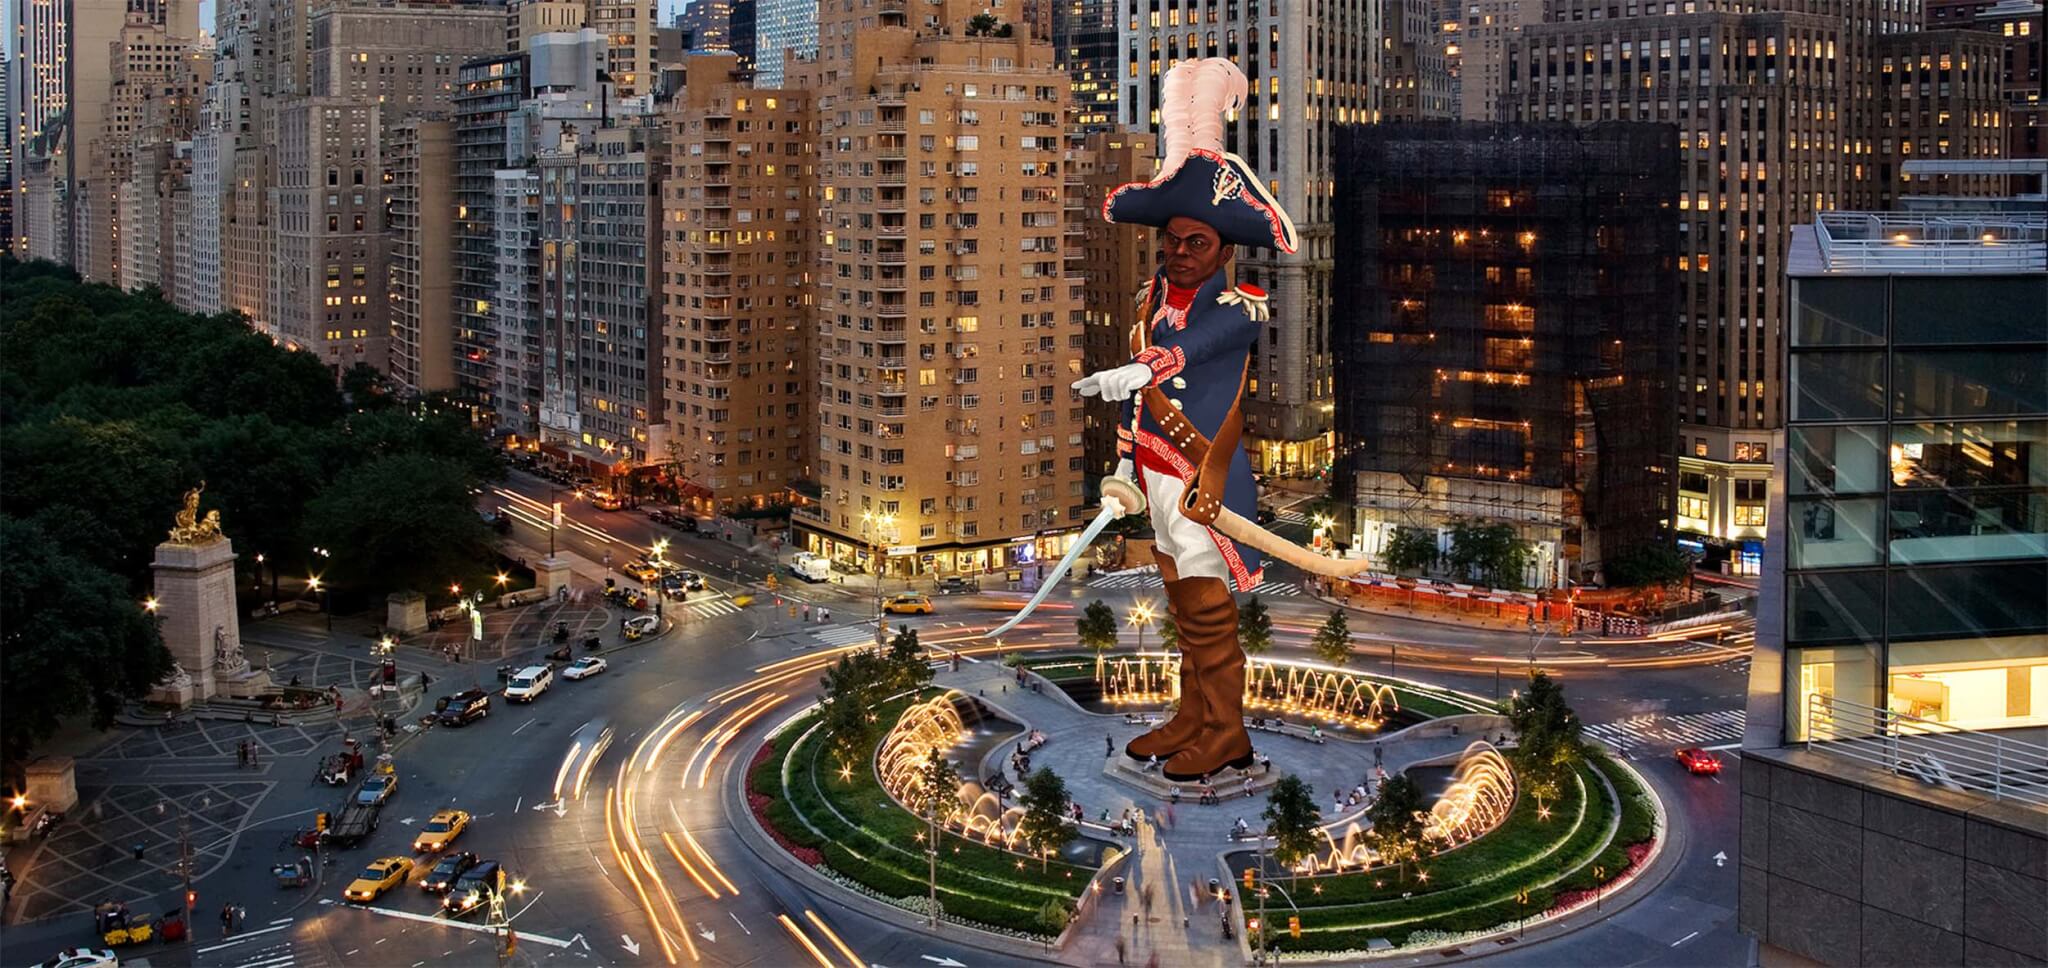 augmented reality of monument in columbus circle